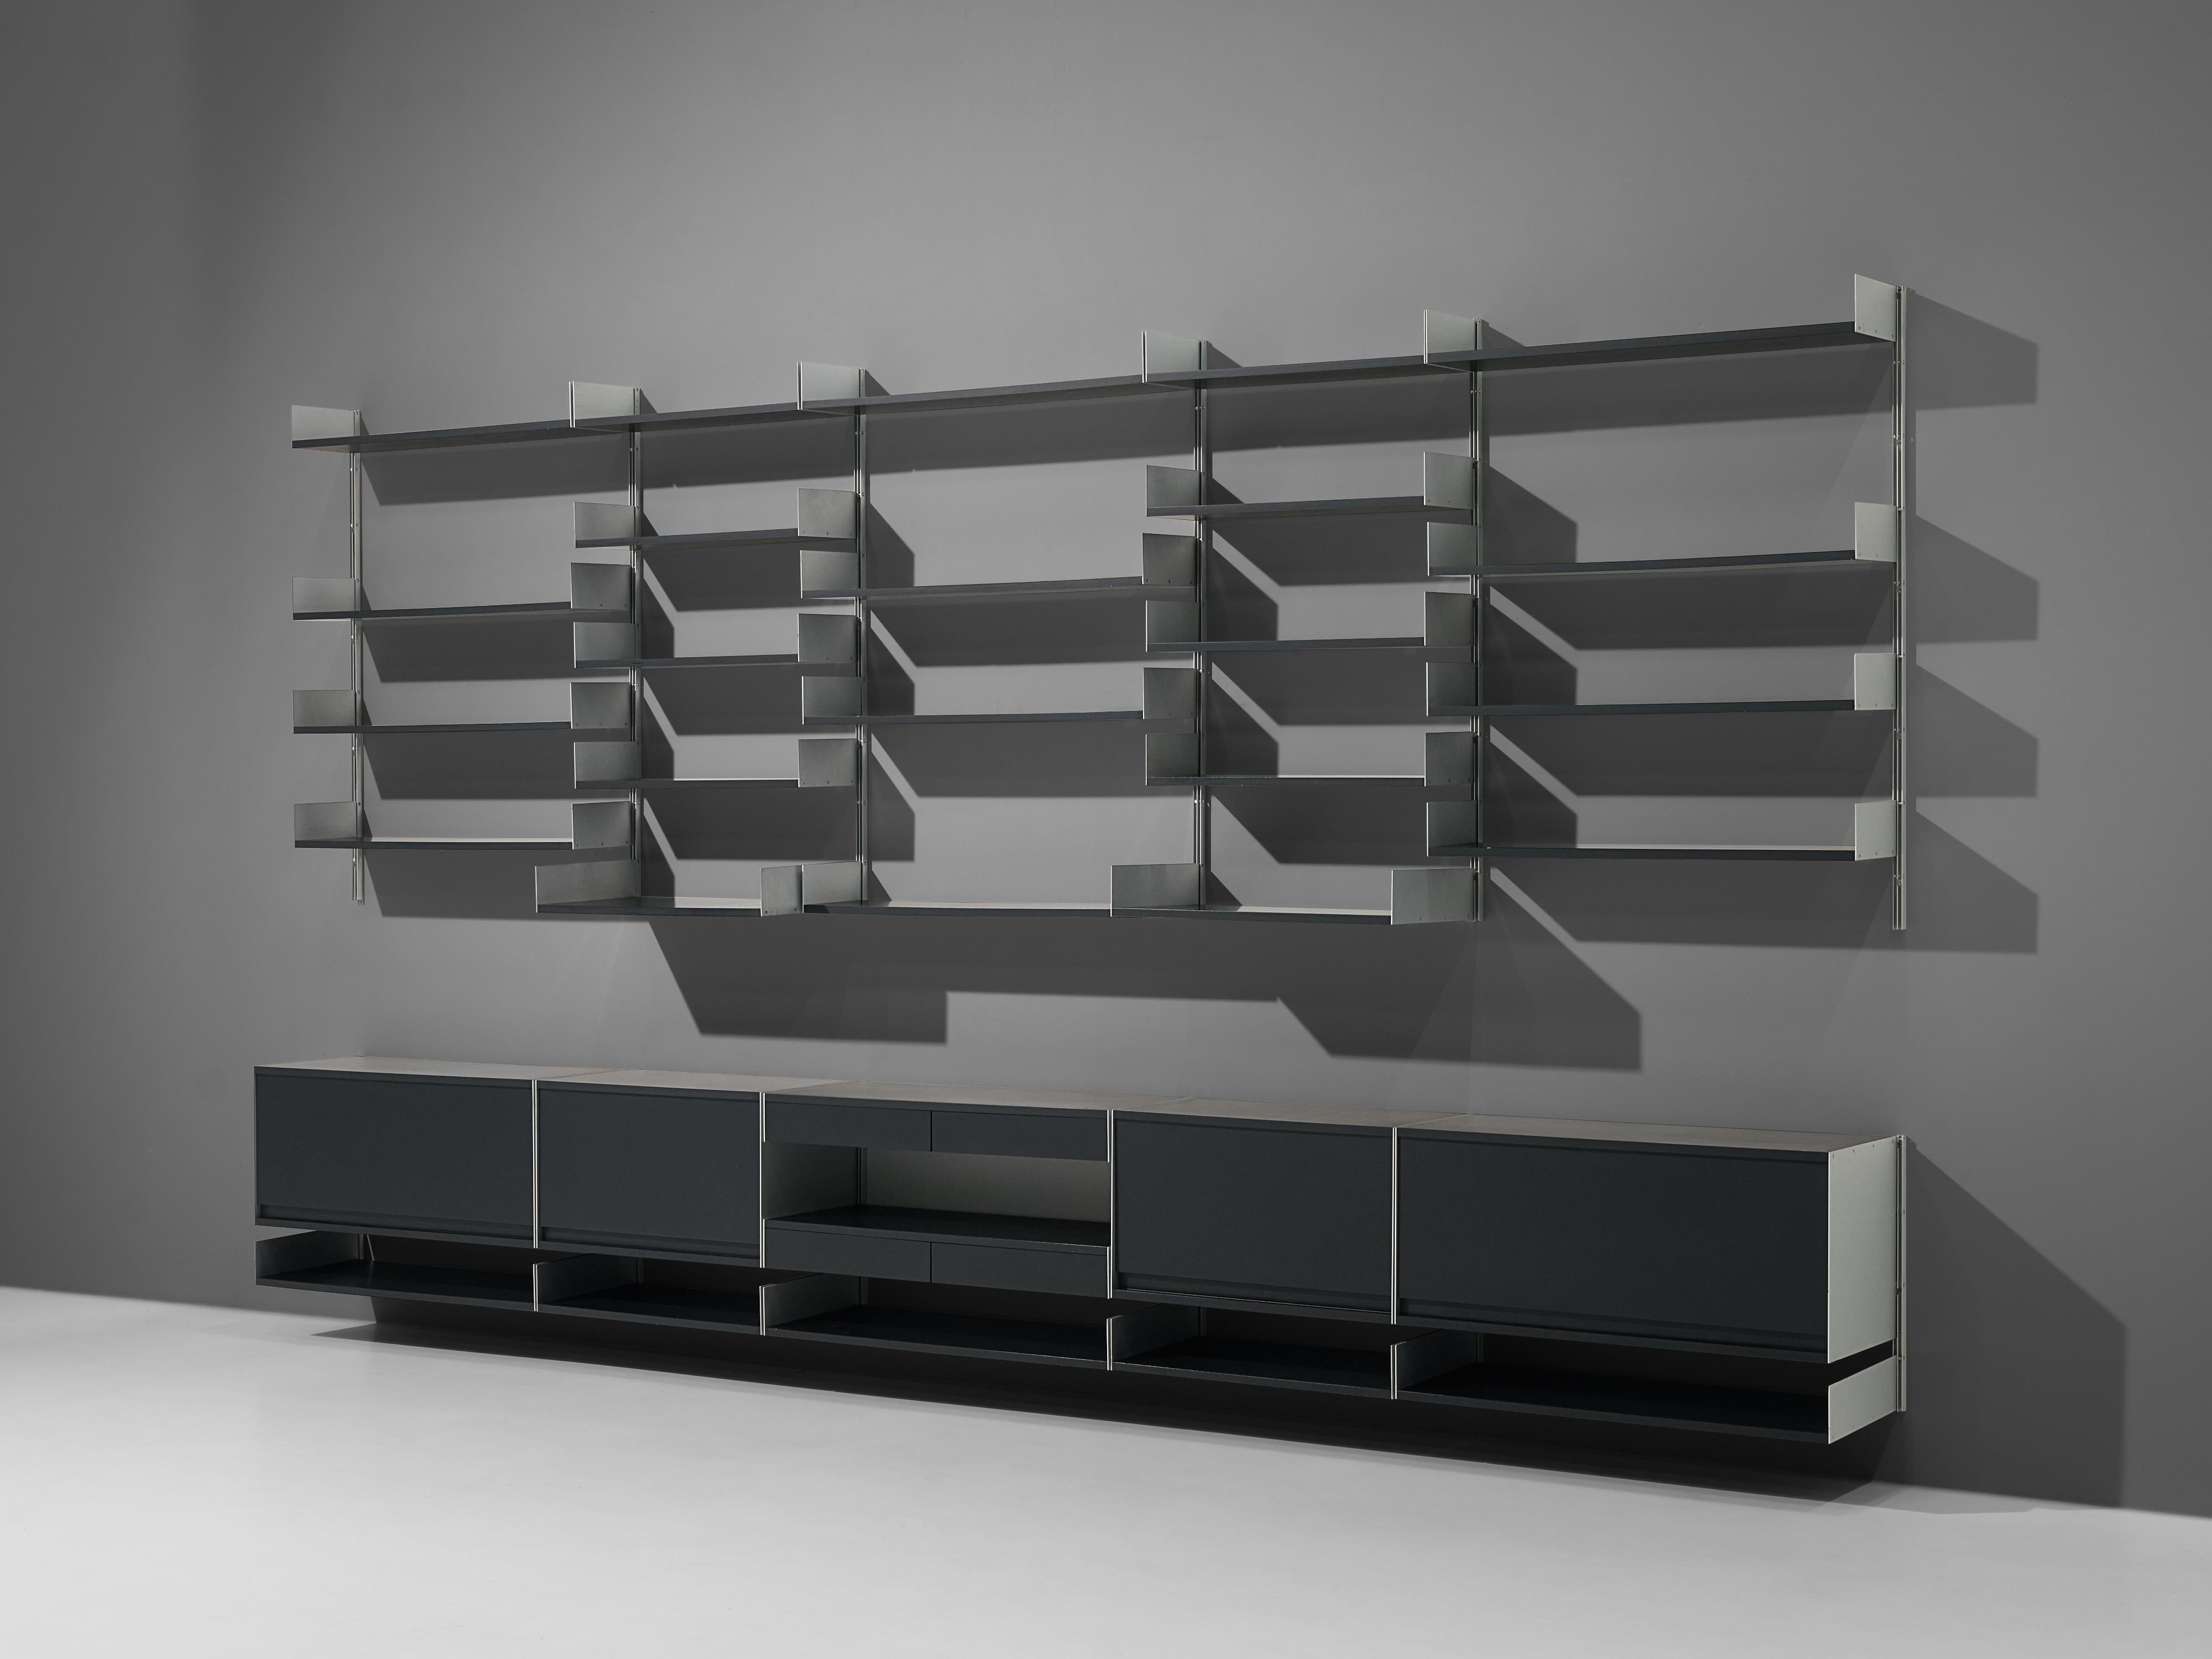 Dieter Rams for Vitsoe, wall unit model 606, aluminum, wood, Germany, design 1960

This grand wall unit is design by German product and furniture designer Dieter Rams. A sophisticated composition is created by the arrangement of shelves in two